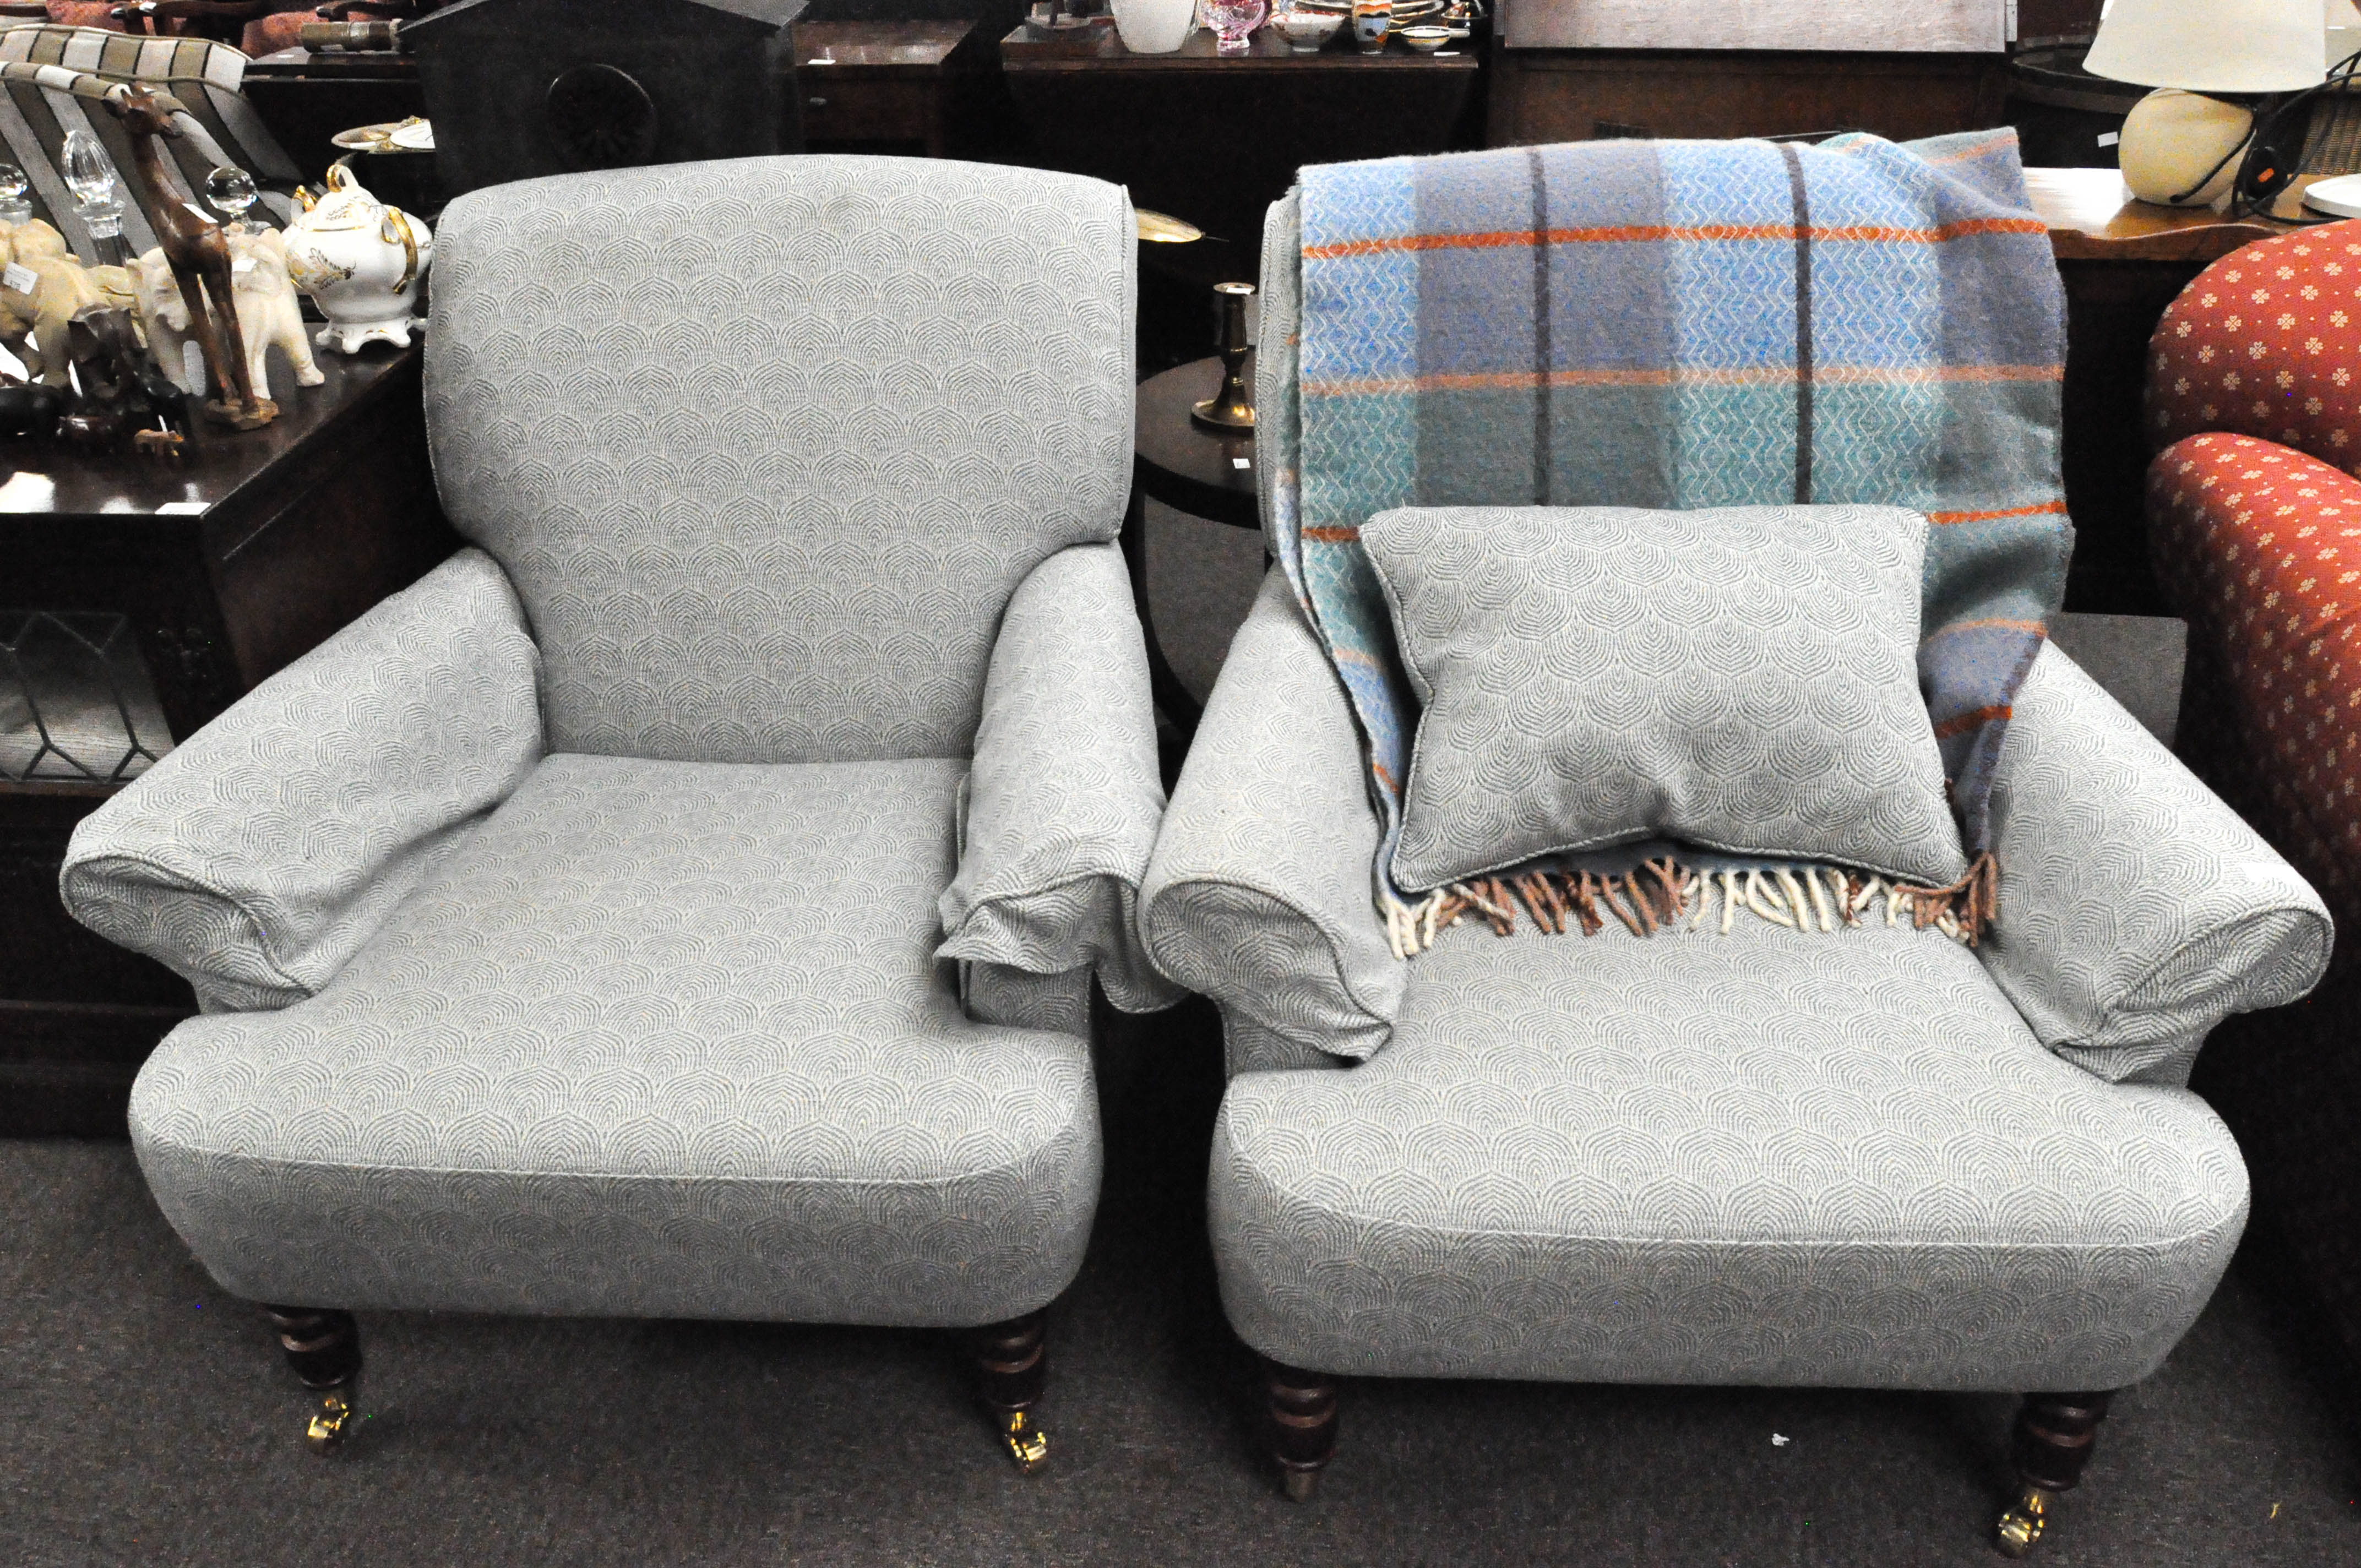 A pair of contemporary Multiyork armchairs upholstered in blue and white,